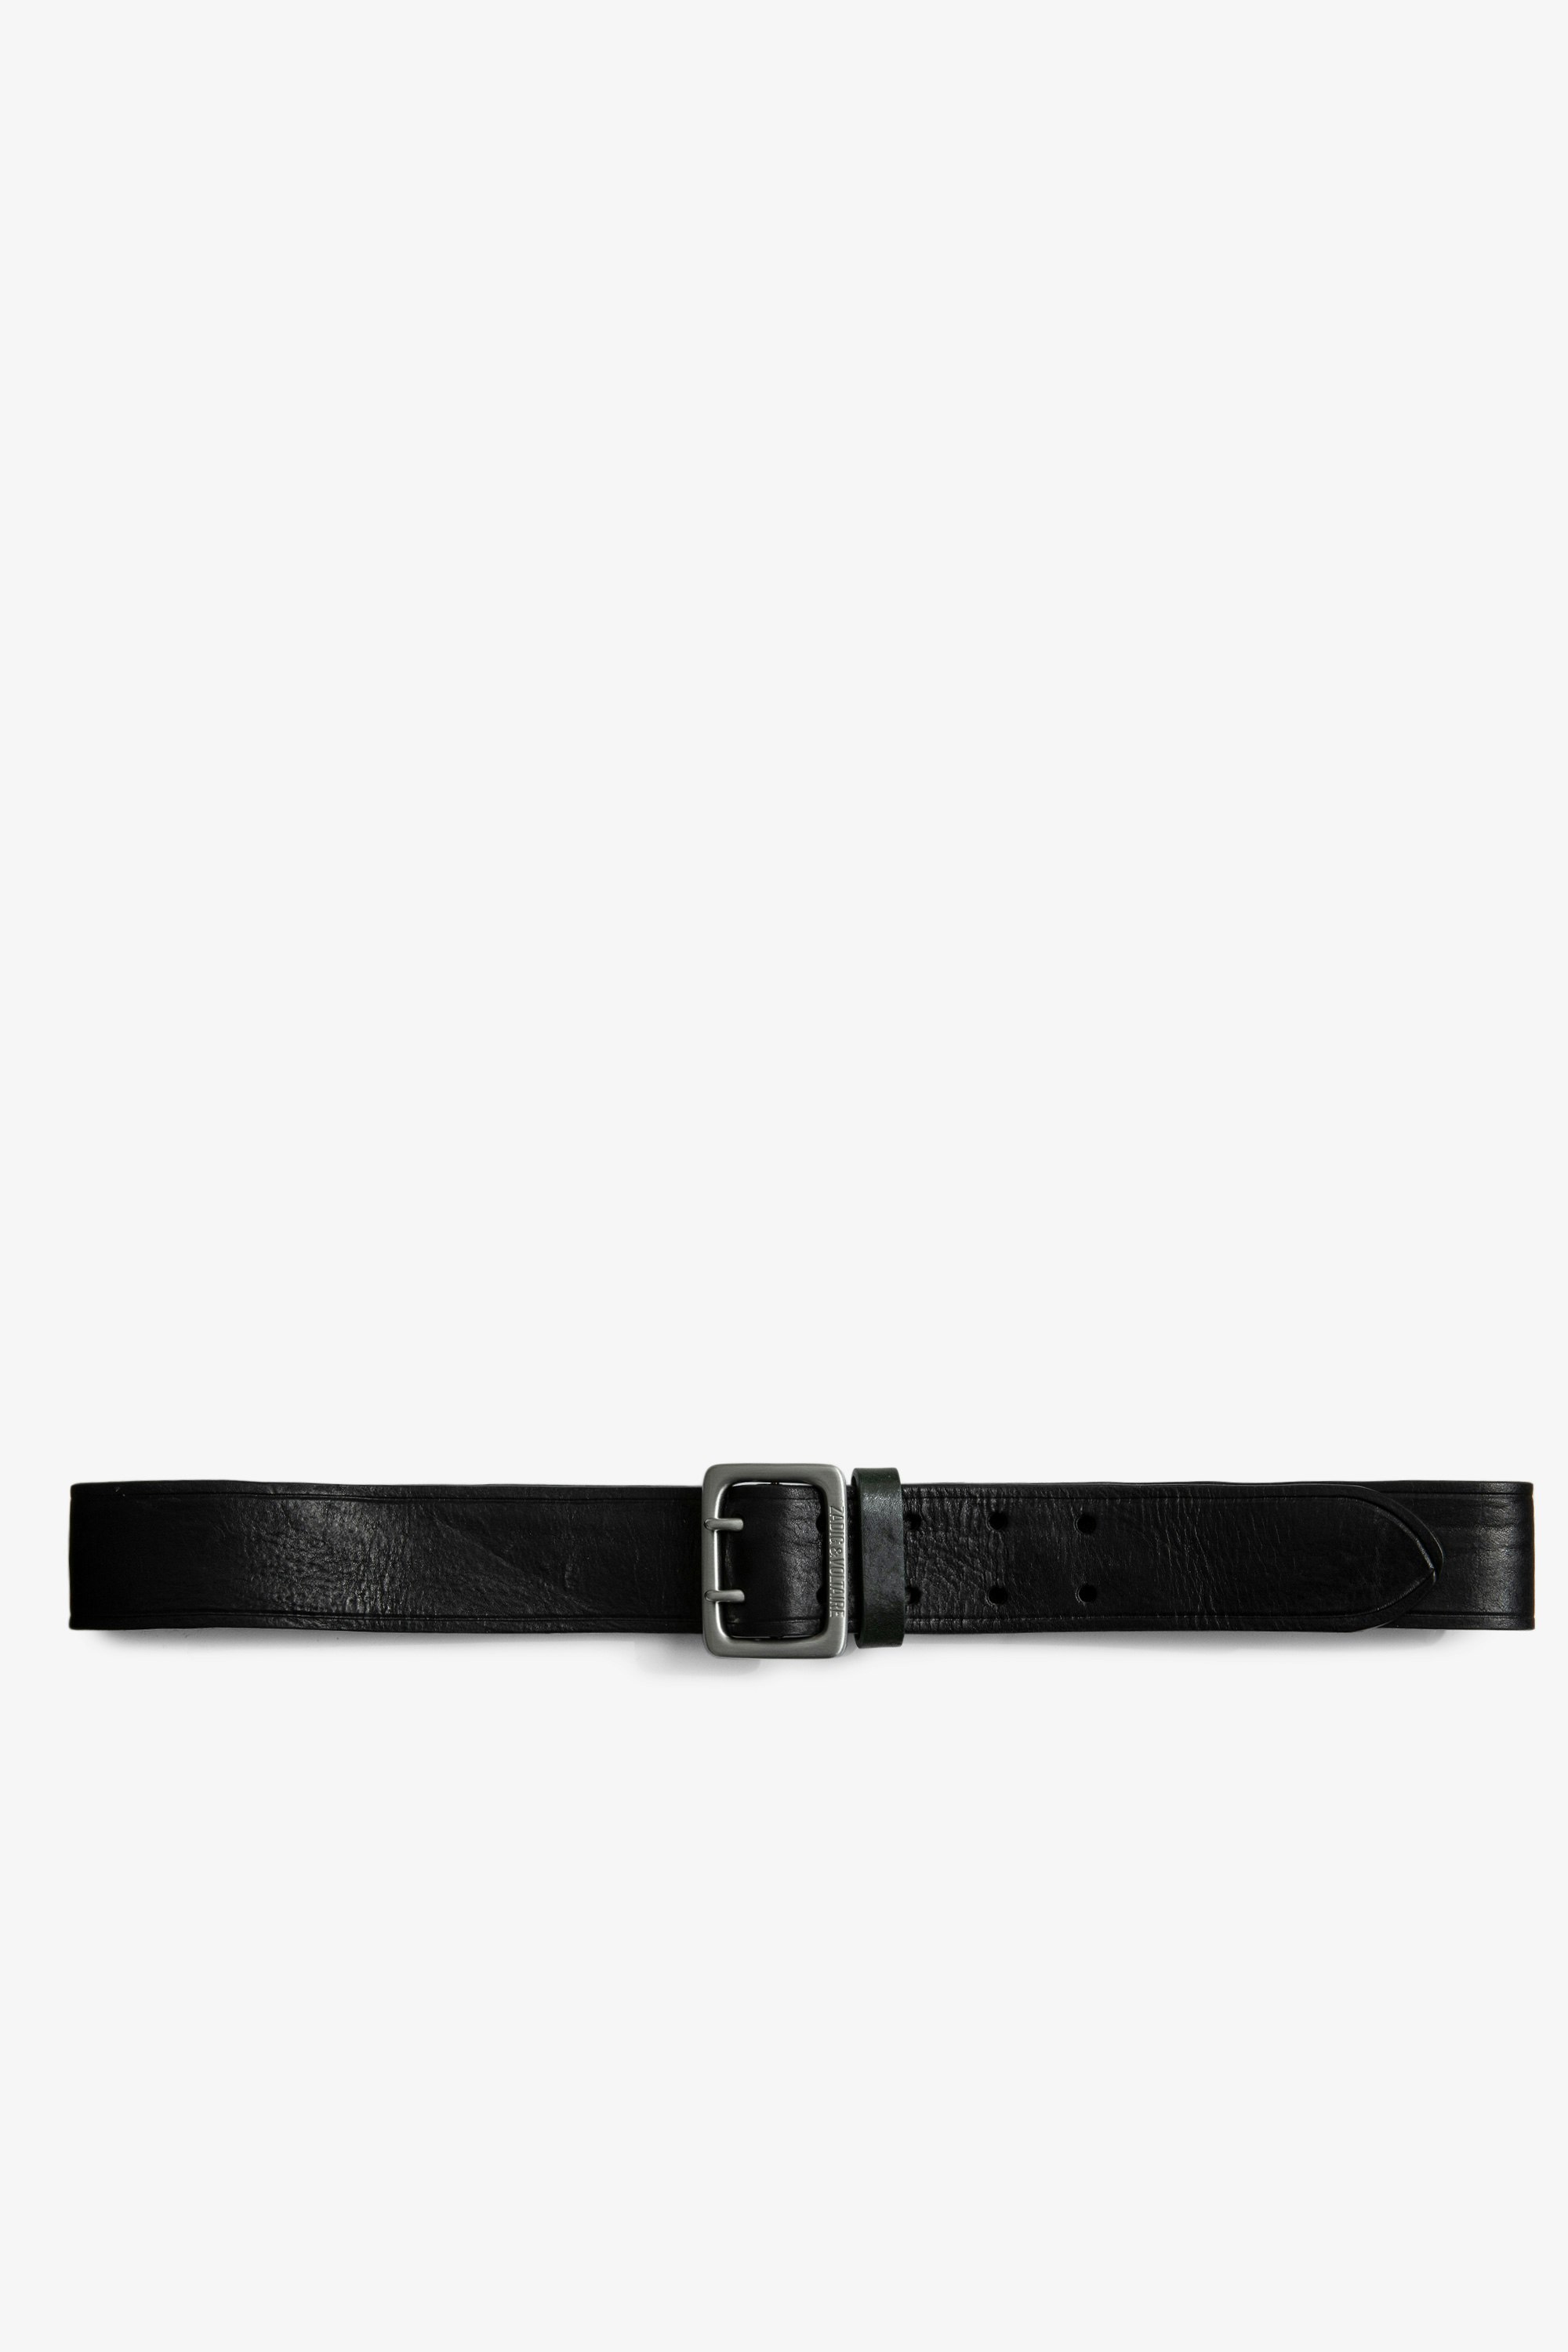 Buckley レザーベルト Men's black leather belt with silver buckle